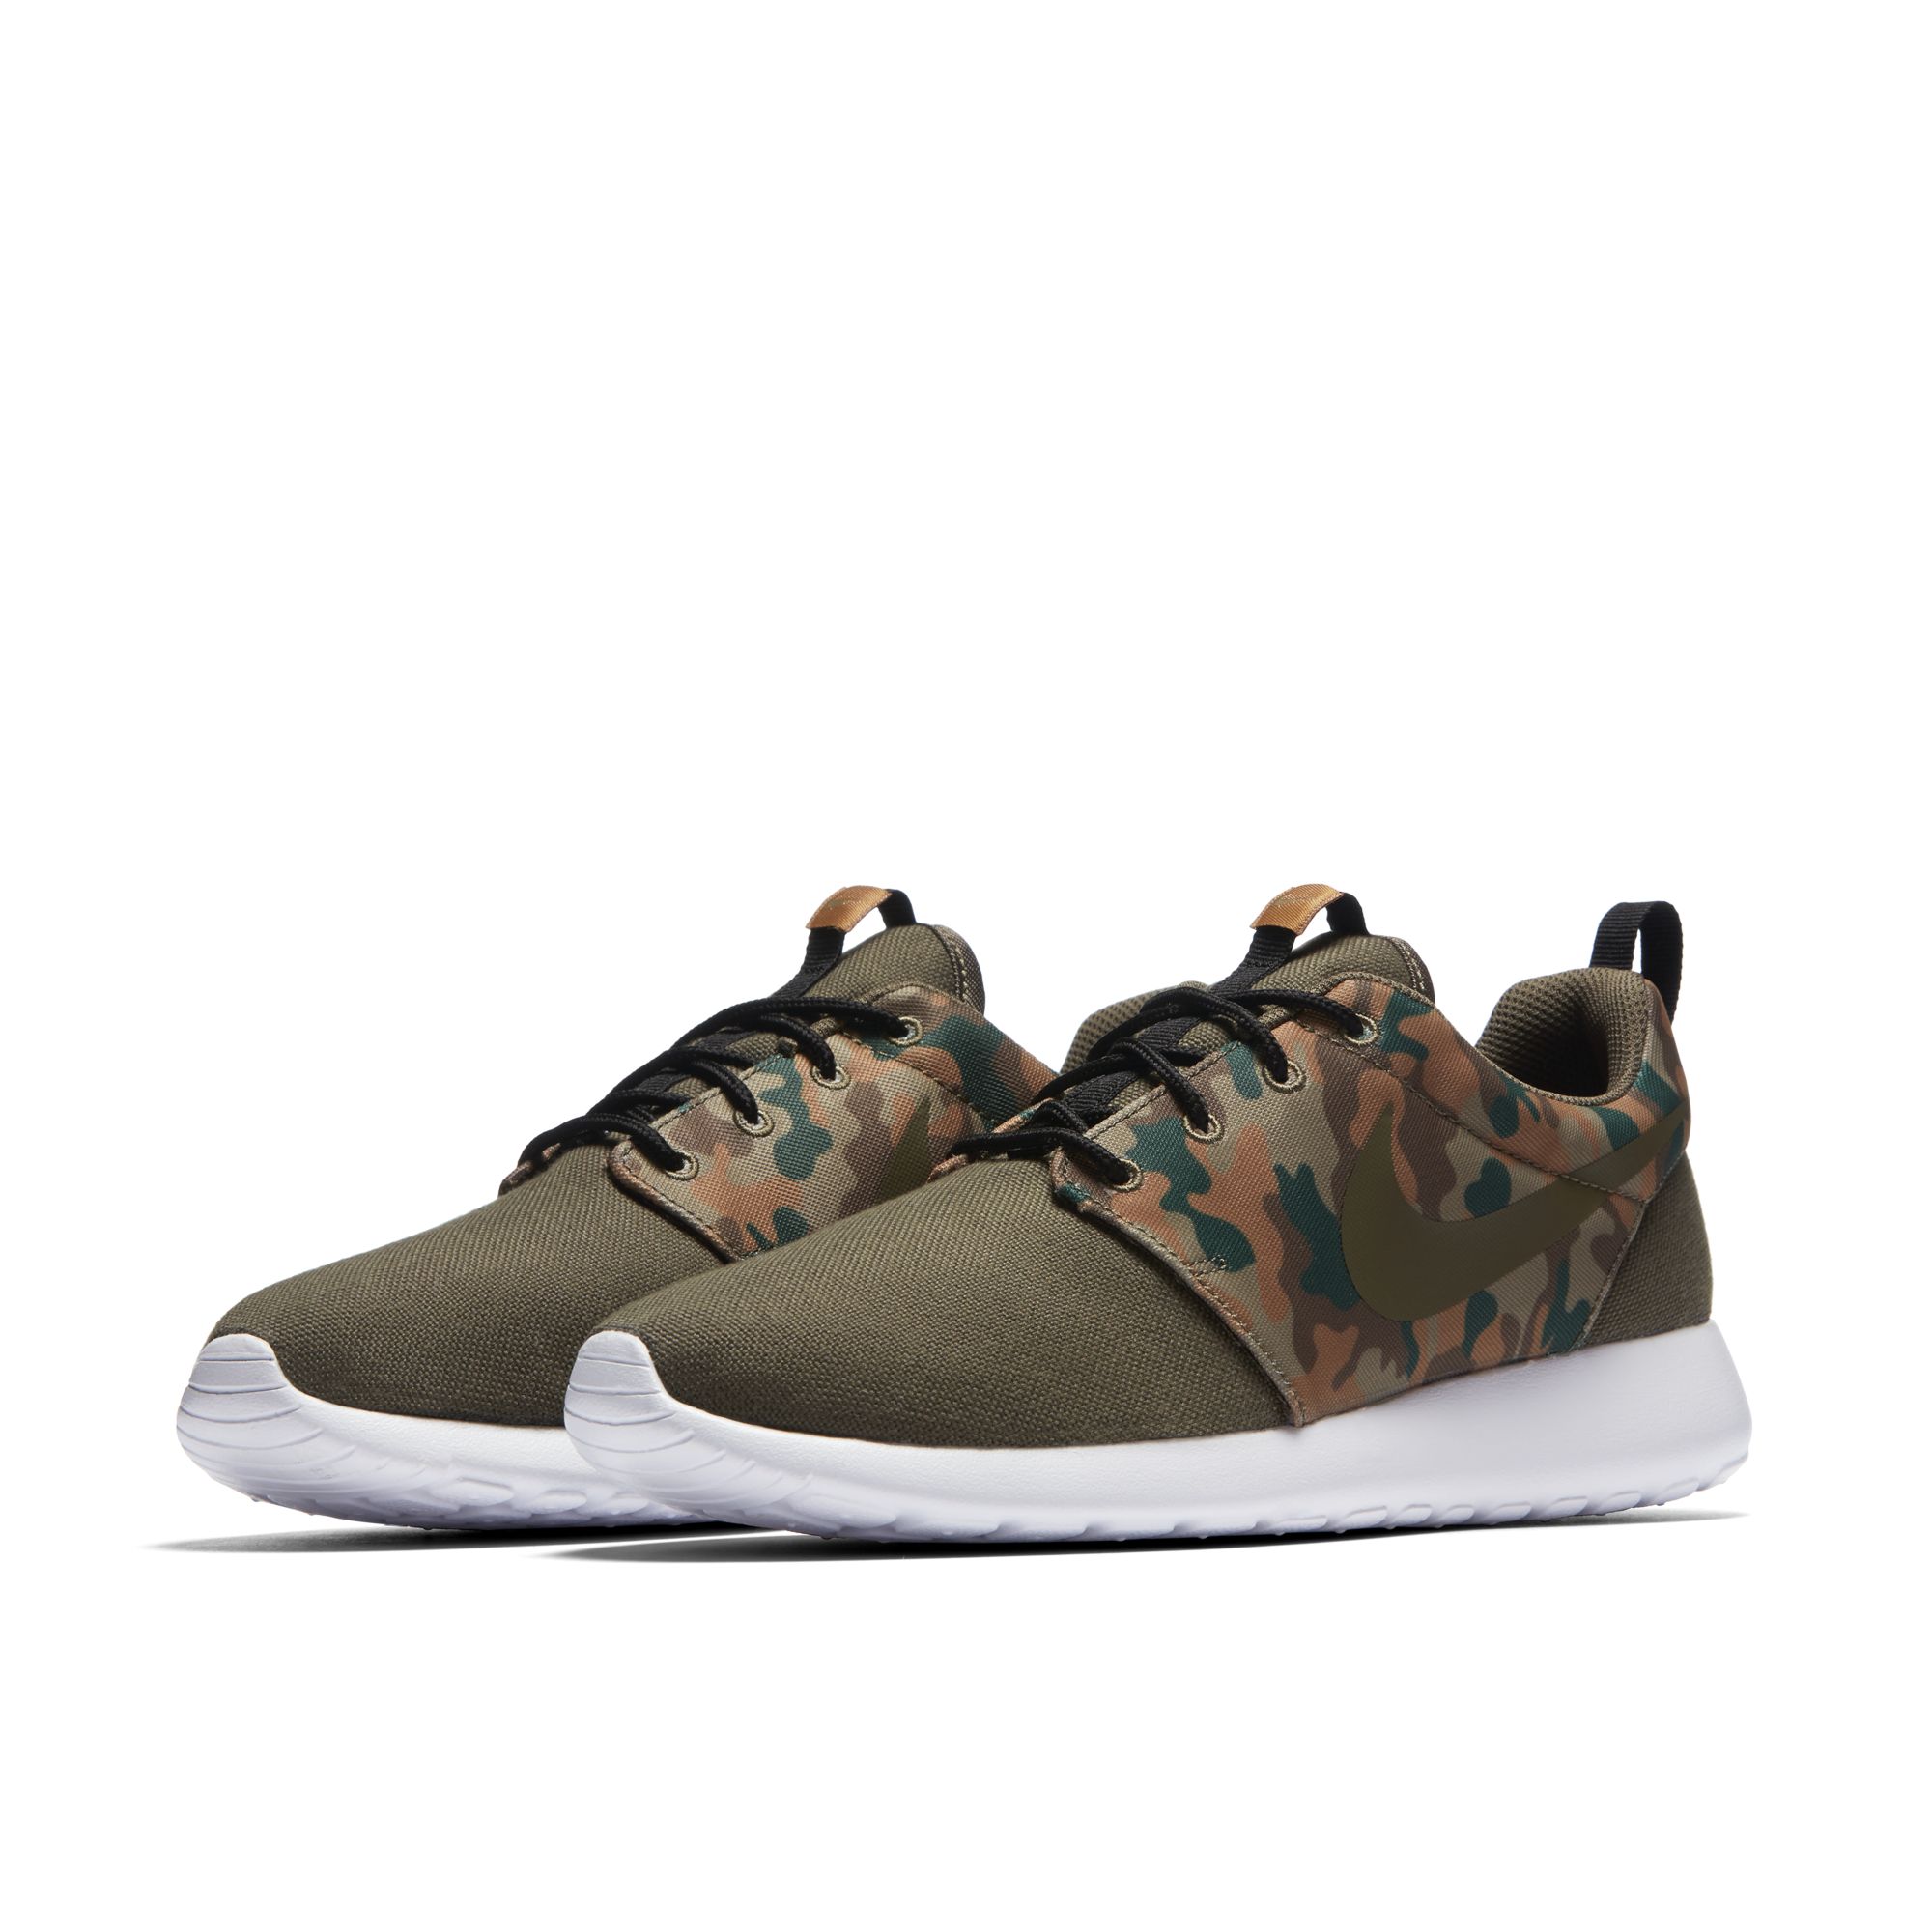 The Latest Nike Roshe One SE Pack Camo for Fall - WearTesters